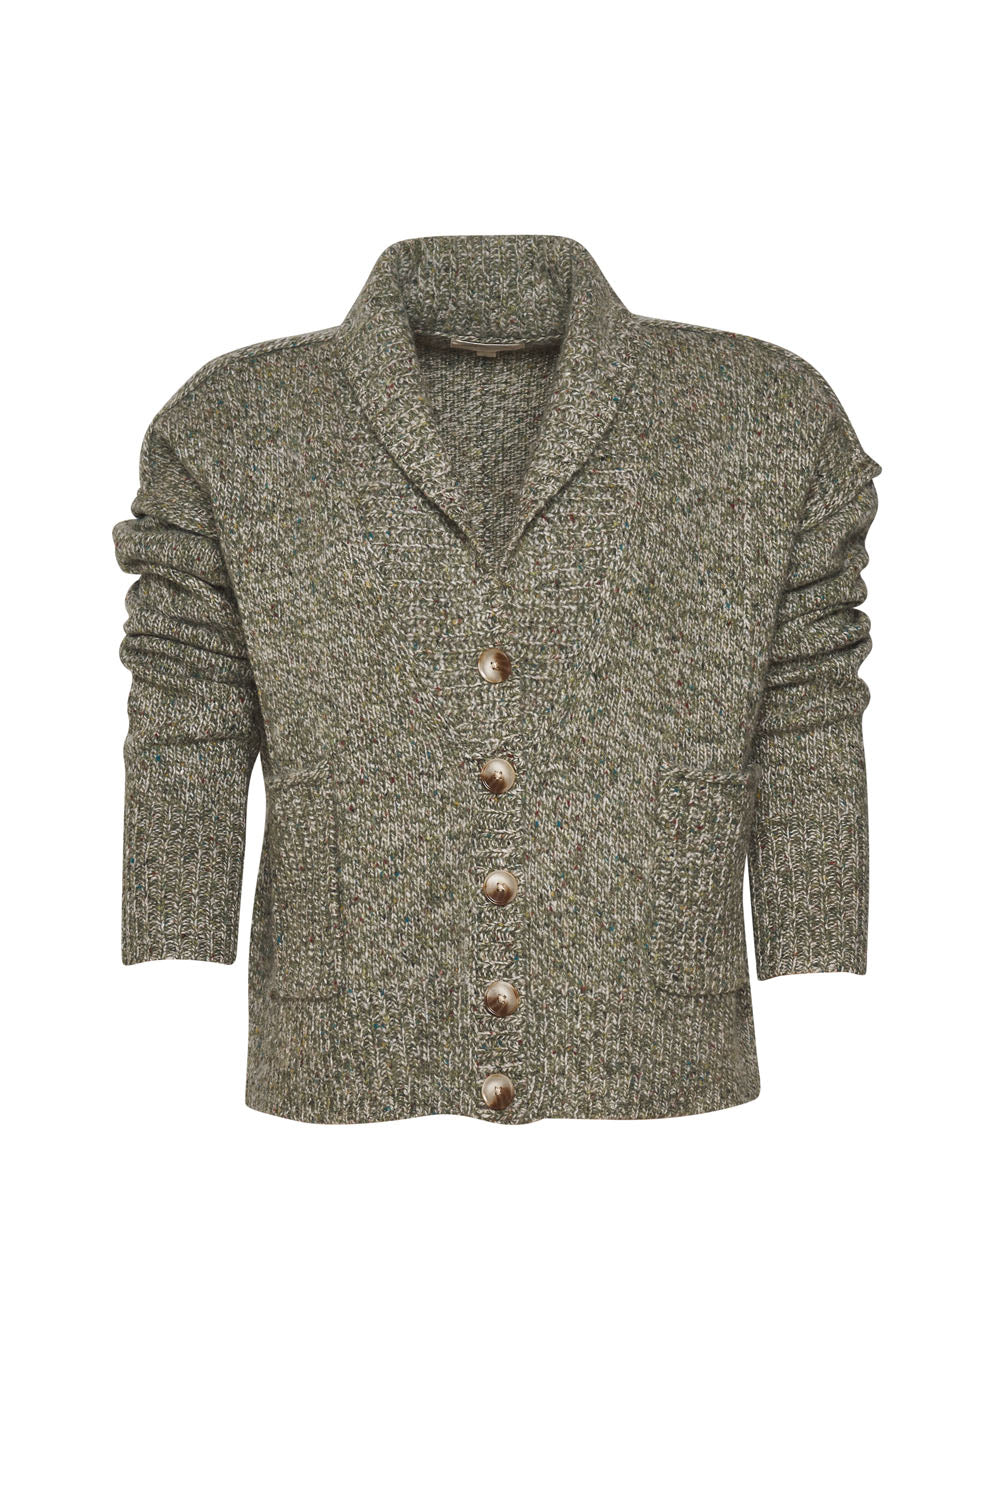 Madly Sweetly - Miss Mossy Cardi (Olive Multi)